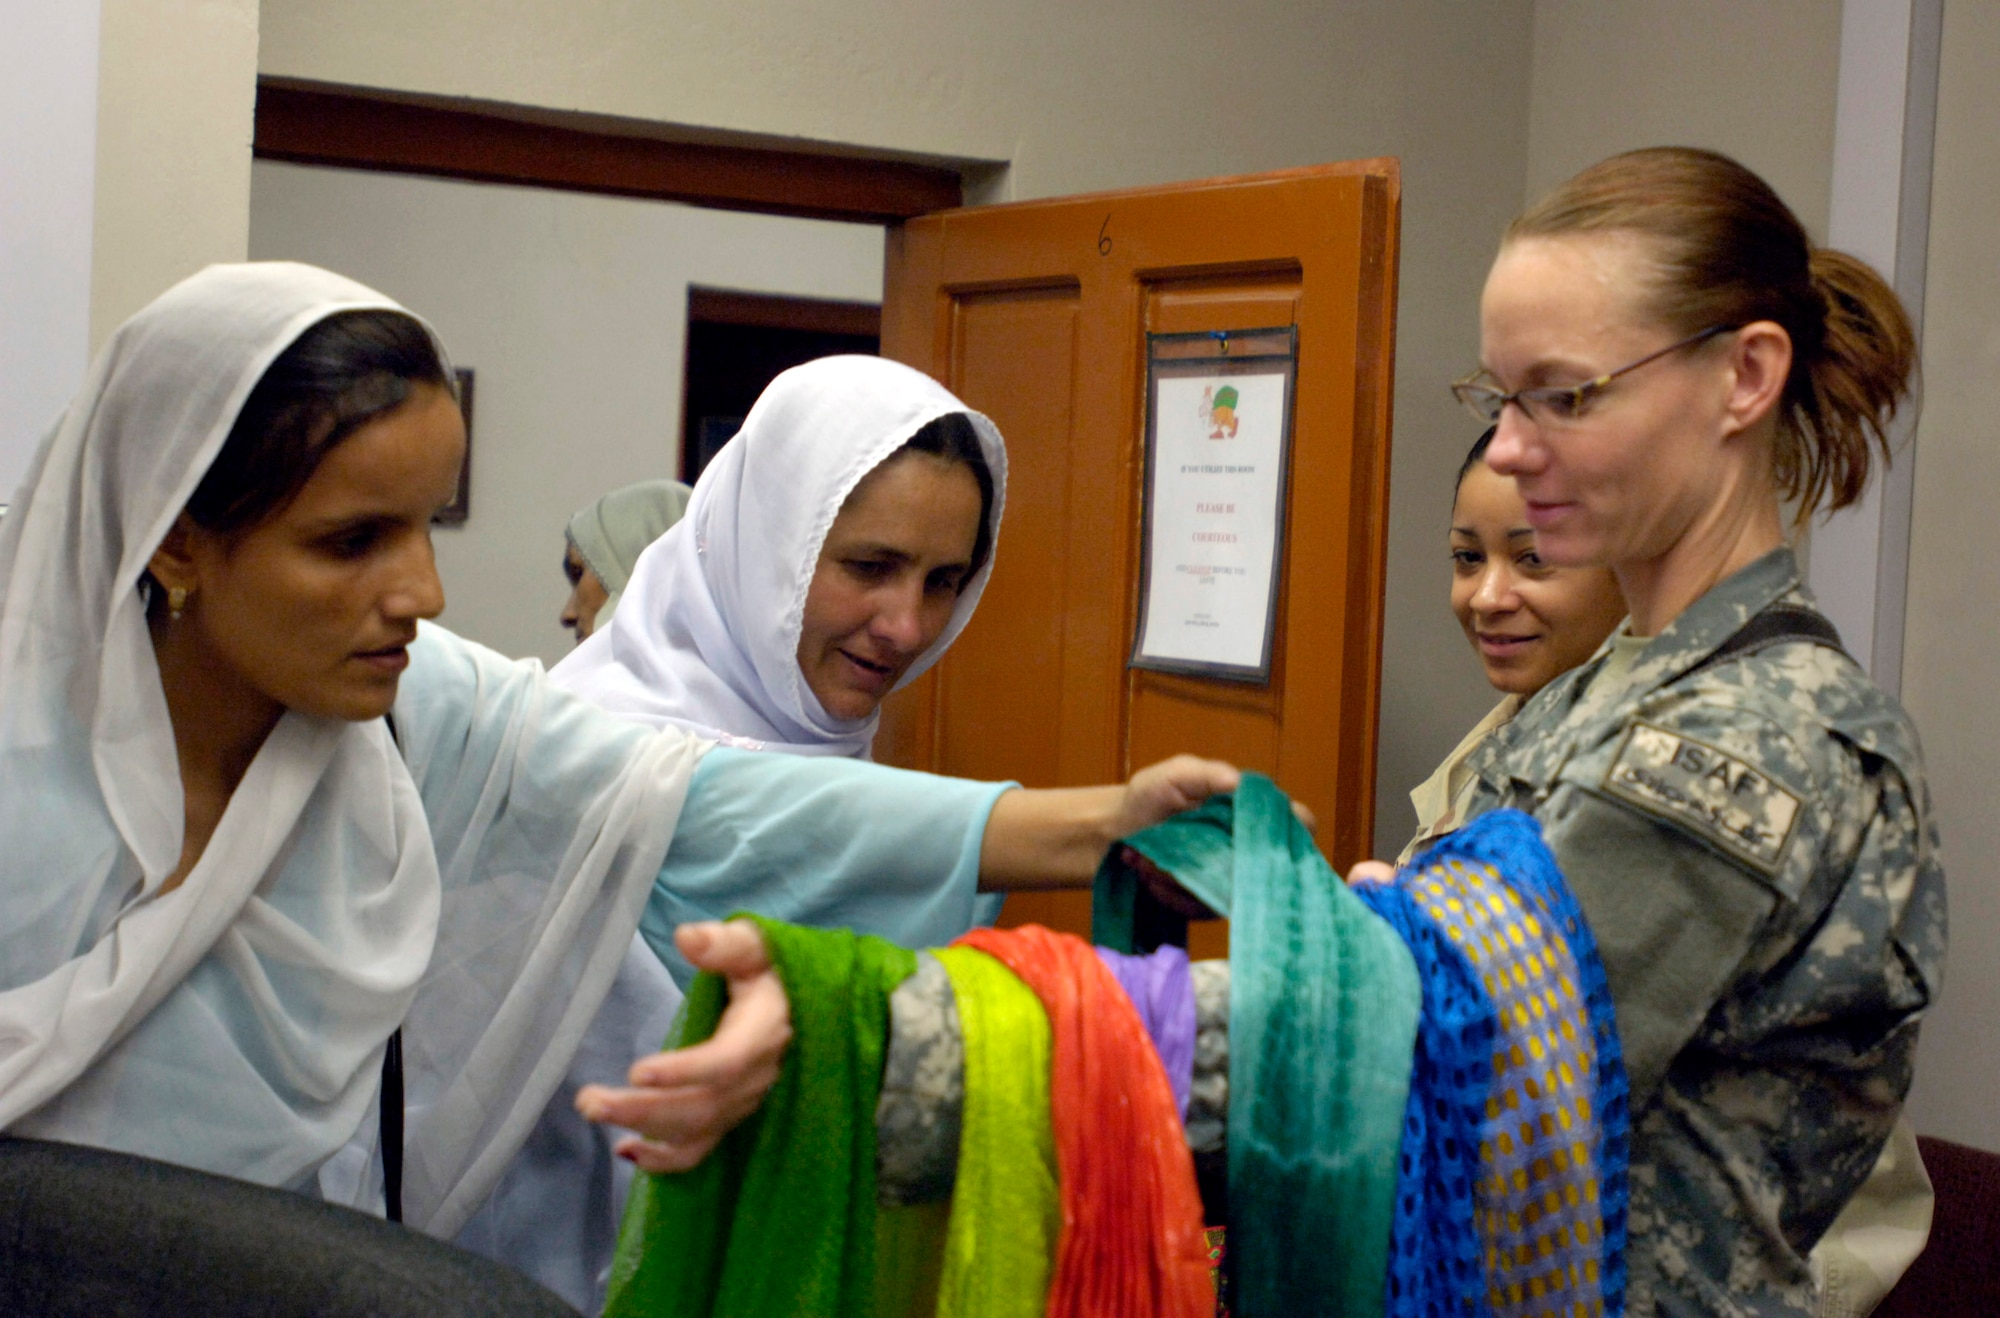 Capt. Heather Kekic offers shawls as gifts to Afghan women who attended a tea Sept. 5 at Forward Operating Base Mehtar Lam, Afghanistan. Female Airmen and Soldiers assigned to the Laghman Provincial Reconstruction Team hosted the tea for influential Afghan women living throughout Afghanistan's Laghman province. Captain Kekic, who is the PRT's public affairs and information officer, is deployed from Randolph Air Force Base, Texas. (U.S. Air Force photo/Staff Sgt. Julie Weckerlein)